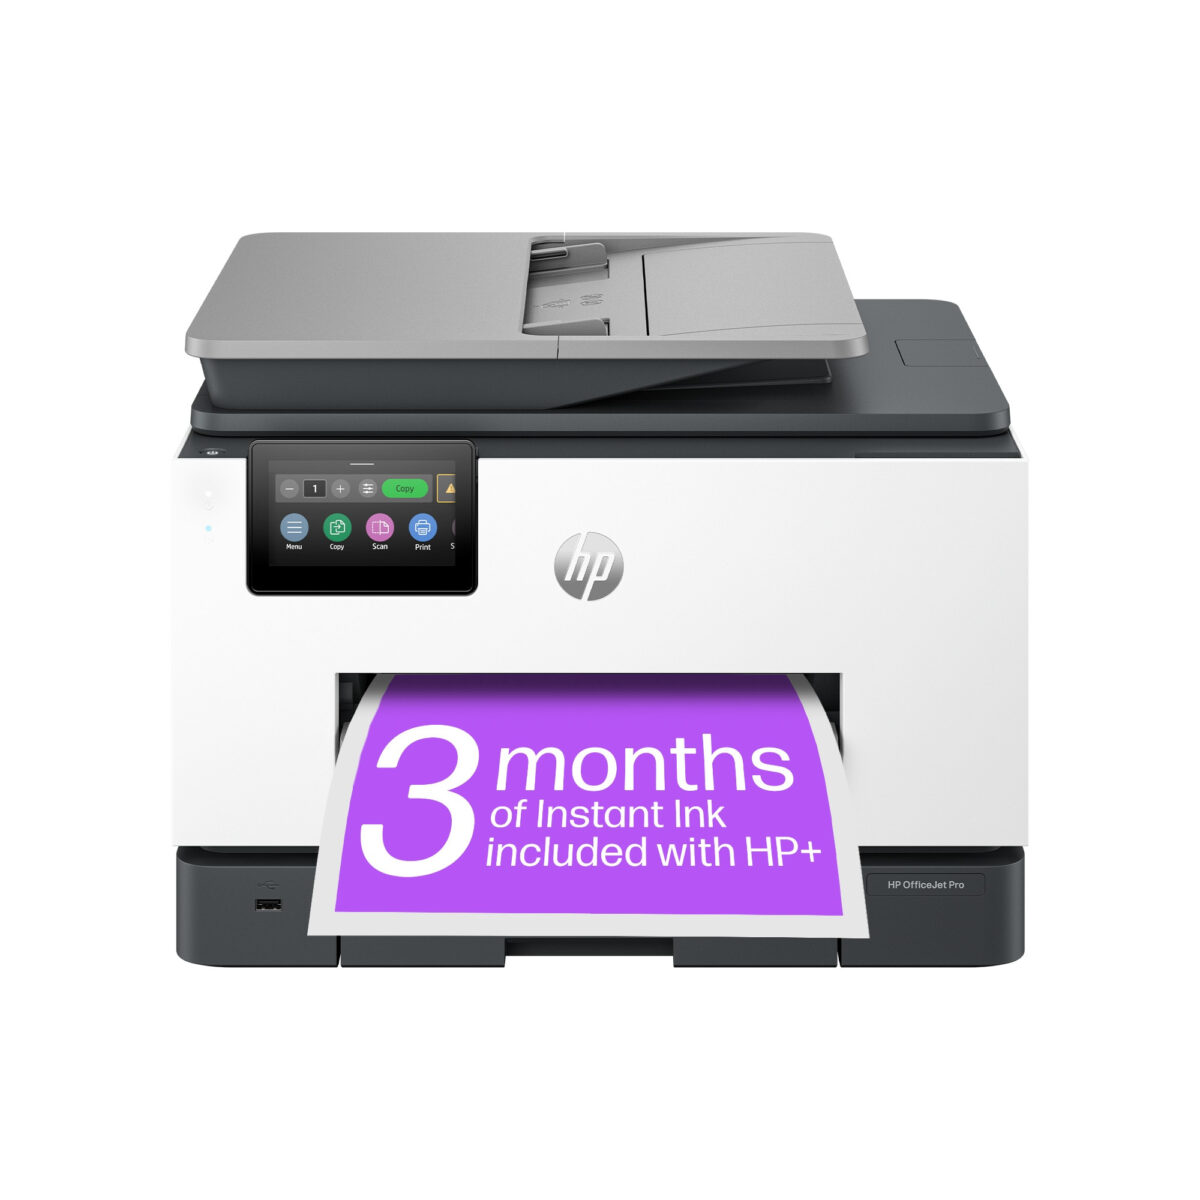 404M5B#686 HP OfficeJet Pro HP 9132e All-in-One Printer, Color, Printer for Small medium business, Print, copy, scan, fax, Wireless; HP+; HP Instant Ink eligible; Two-sided printing; Two-sided scanning; Automatic document feeder; Fax; Touchscreen; Smart Advance Scan; Instant Paper